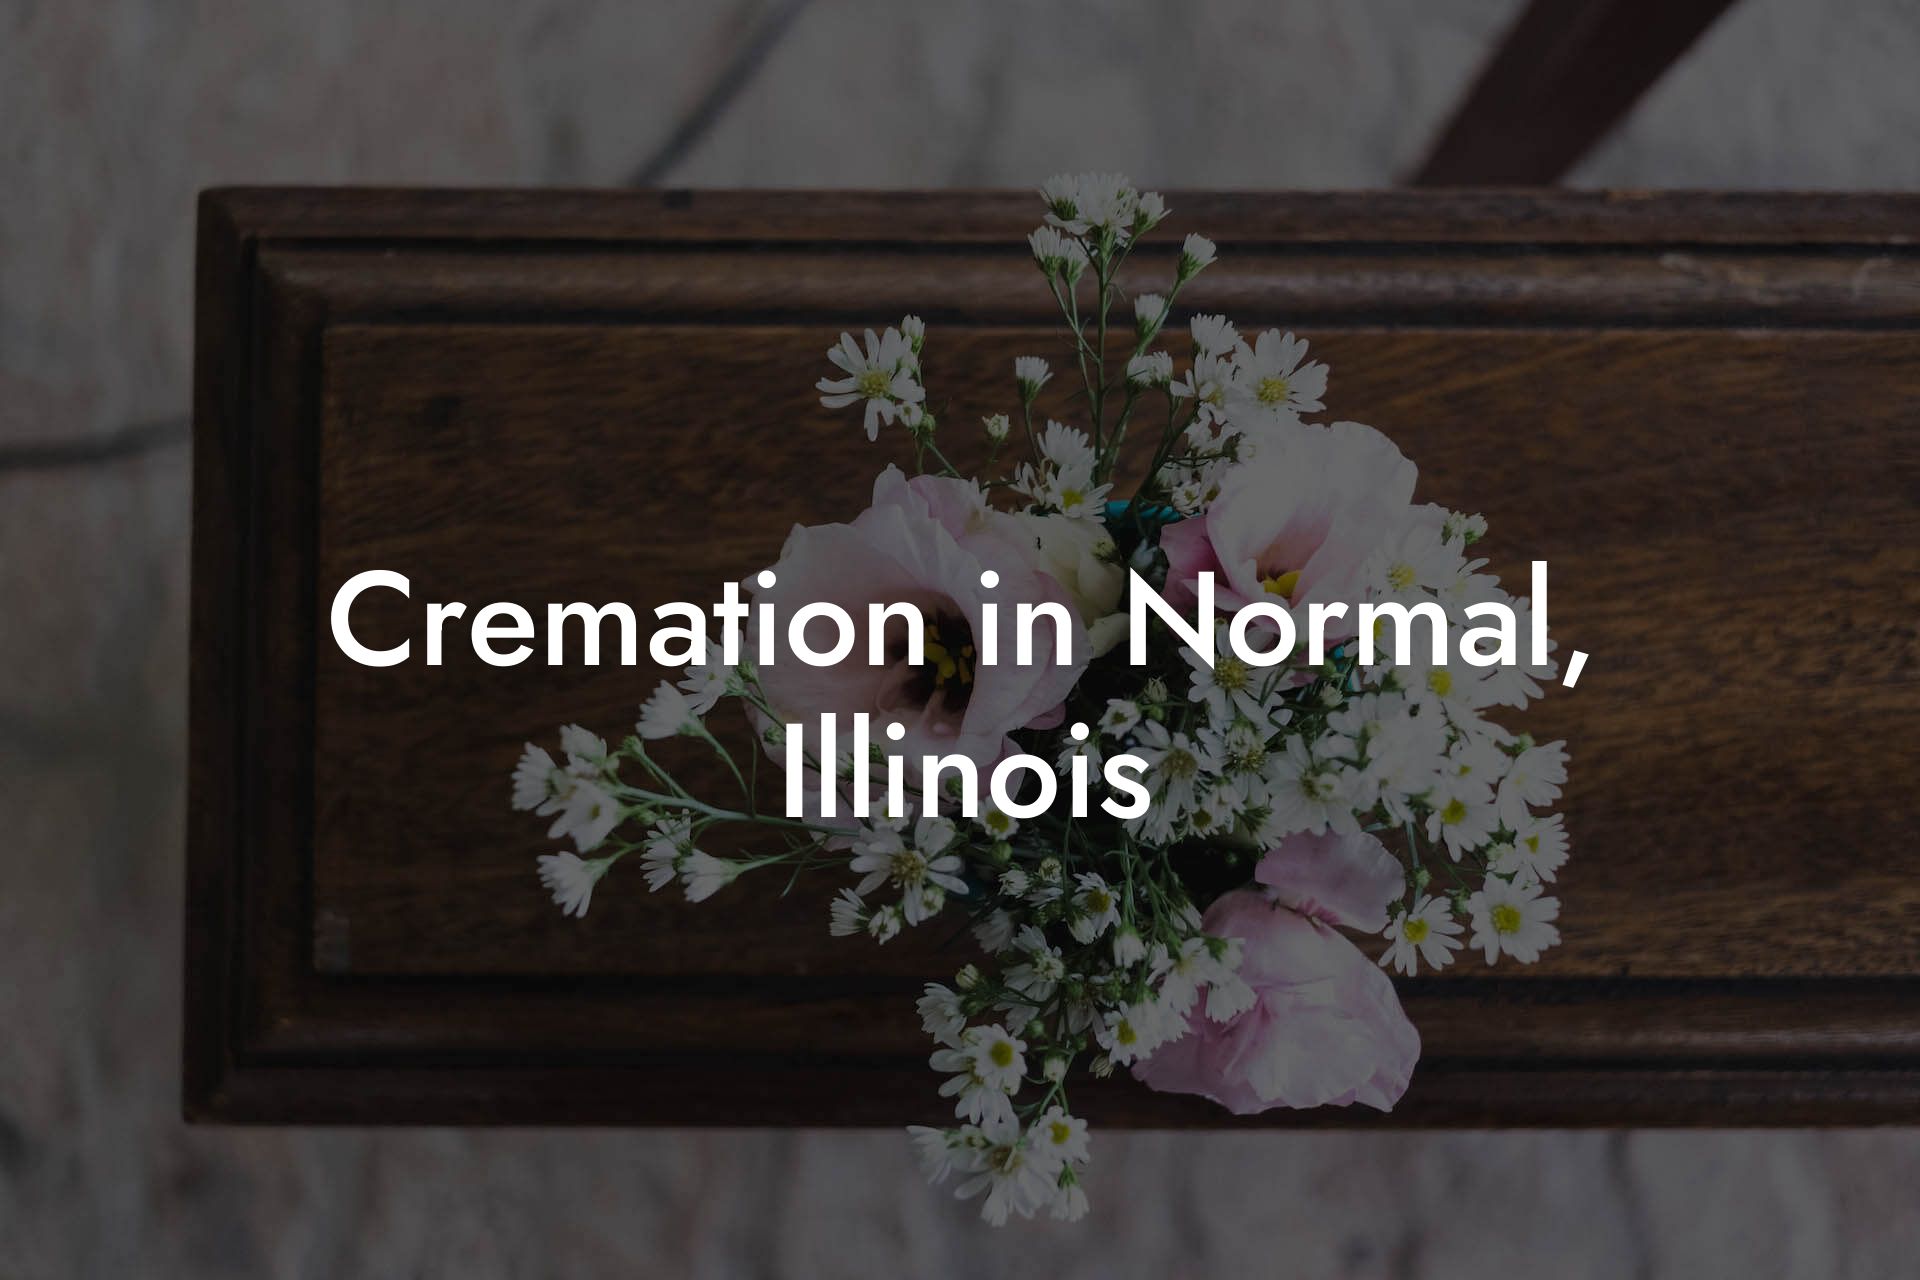 Cremation in Normal, Illinois